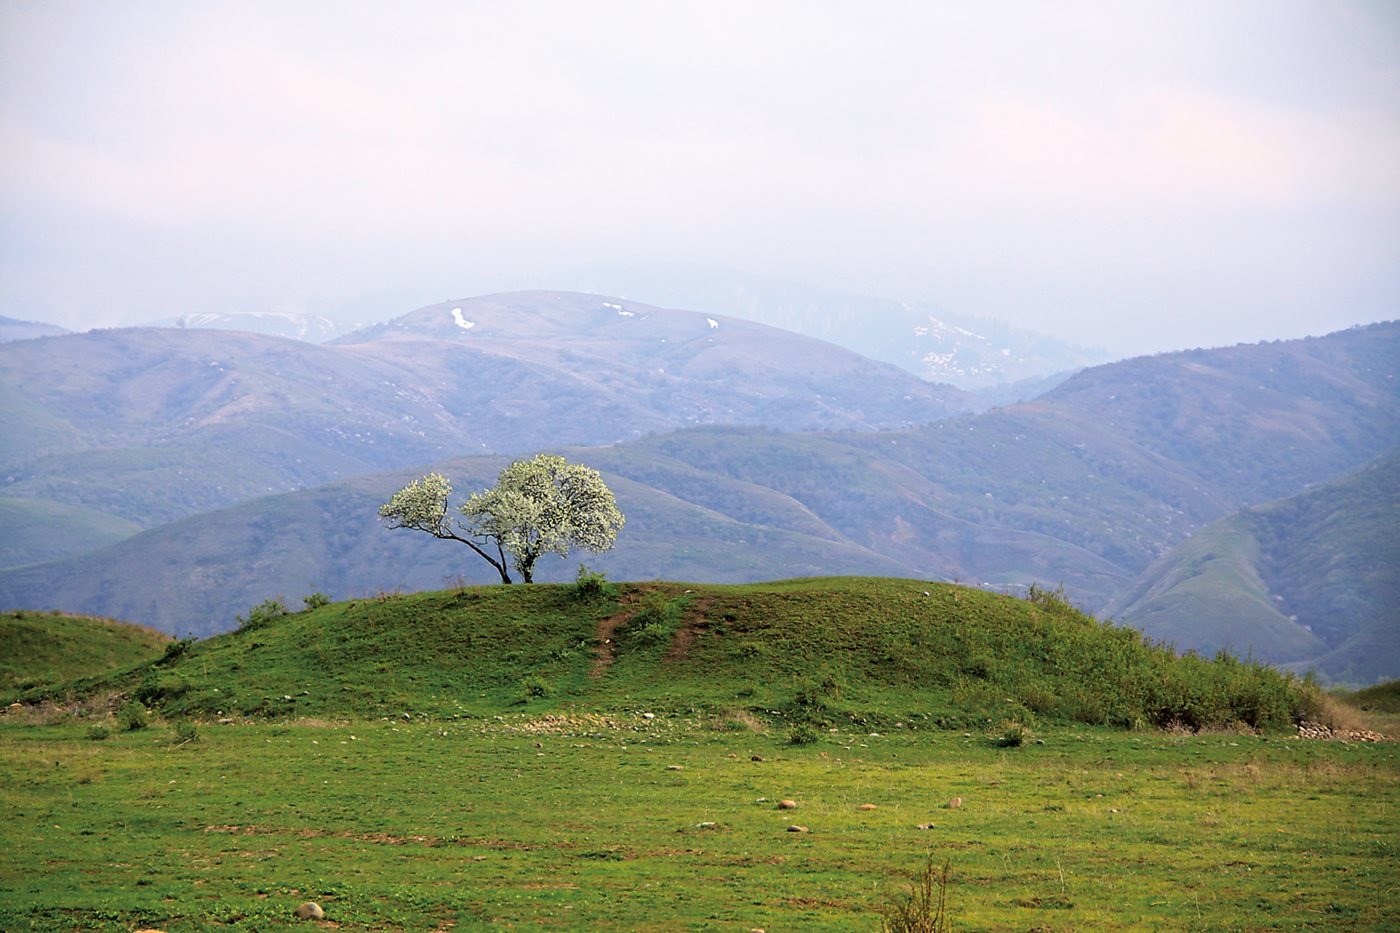 Burial mounds like this one at Issyk Kurgan just outside Almaty can be found as far west as Poland and as far east as southern Siberia.